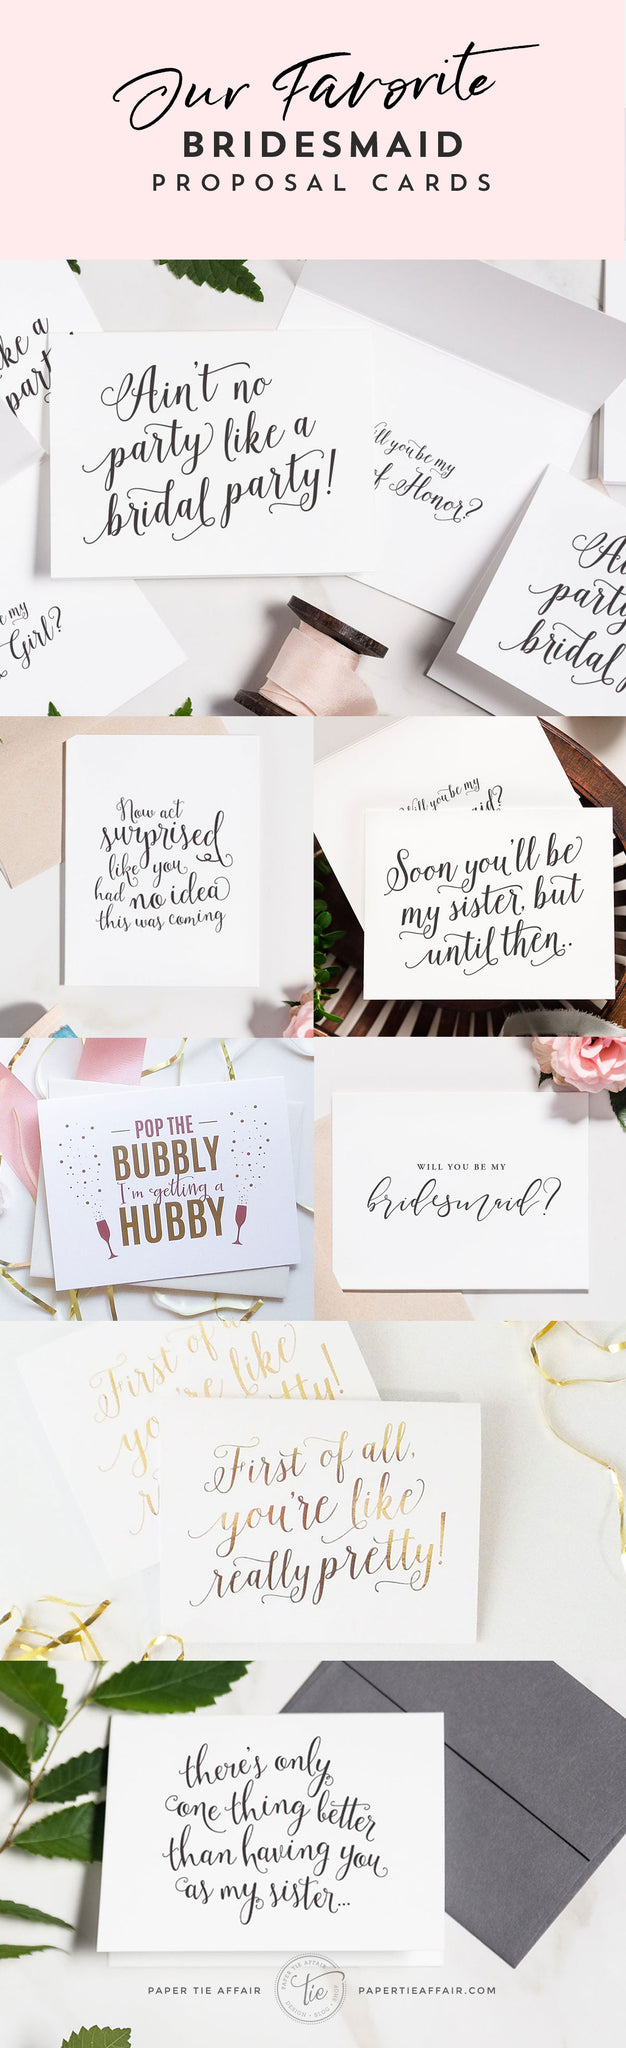 our favorite bridesmaid proposal cards 